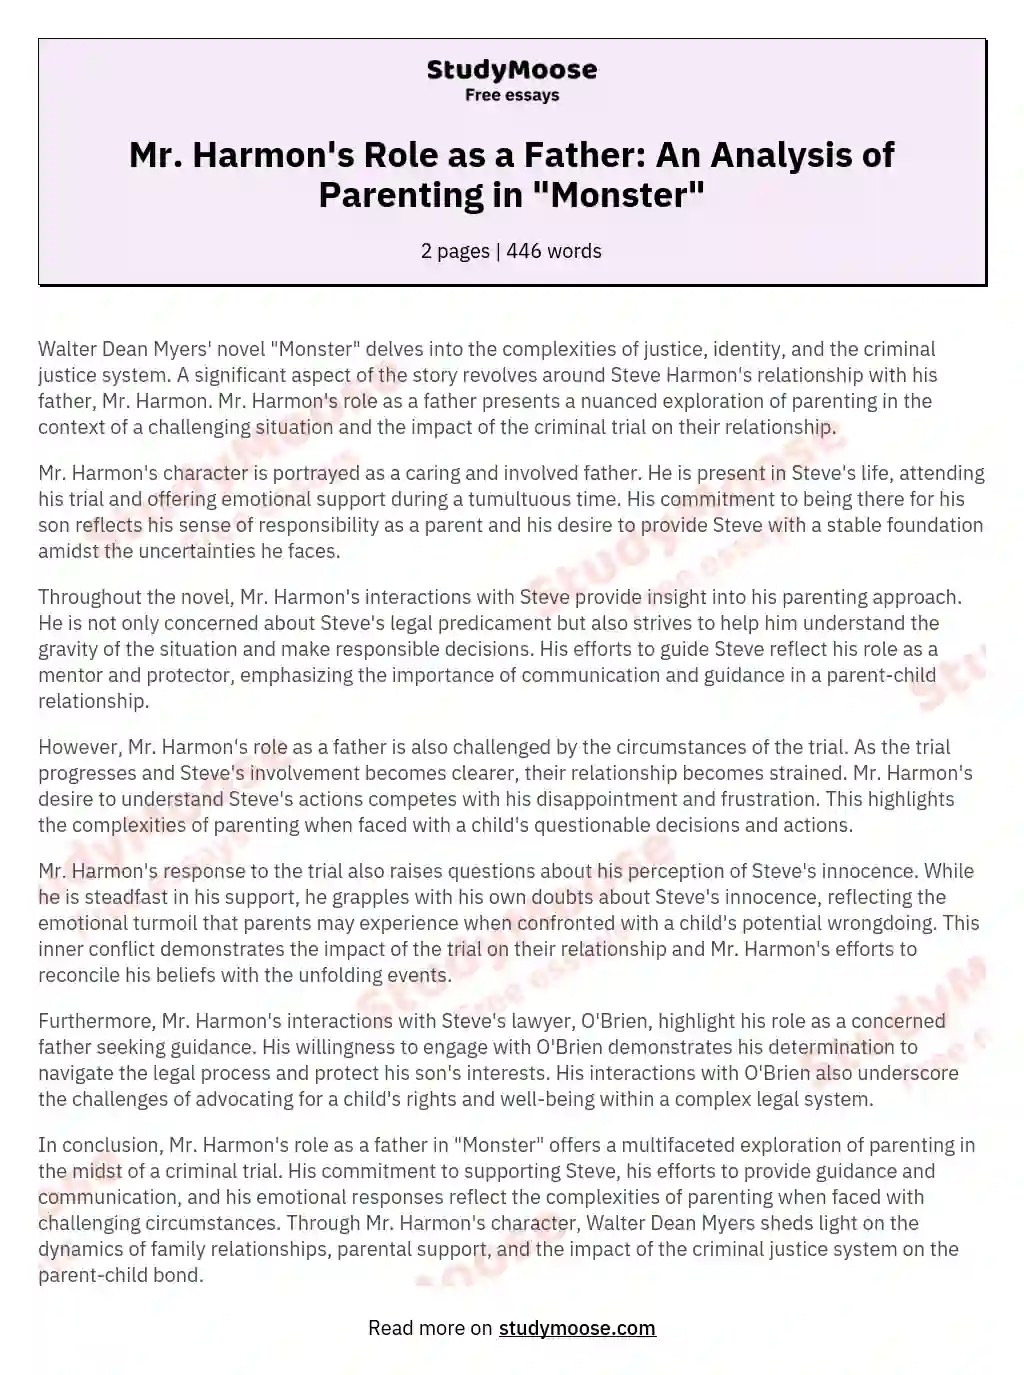 Mr. Harmon's Role as a Father: An Analysis of Parenting in "Monster" essay